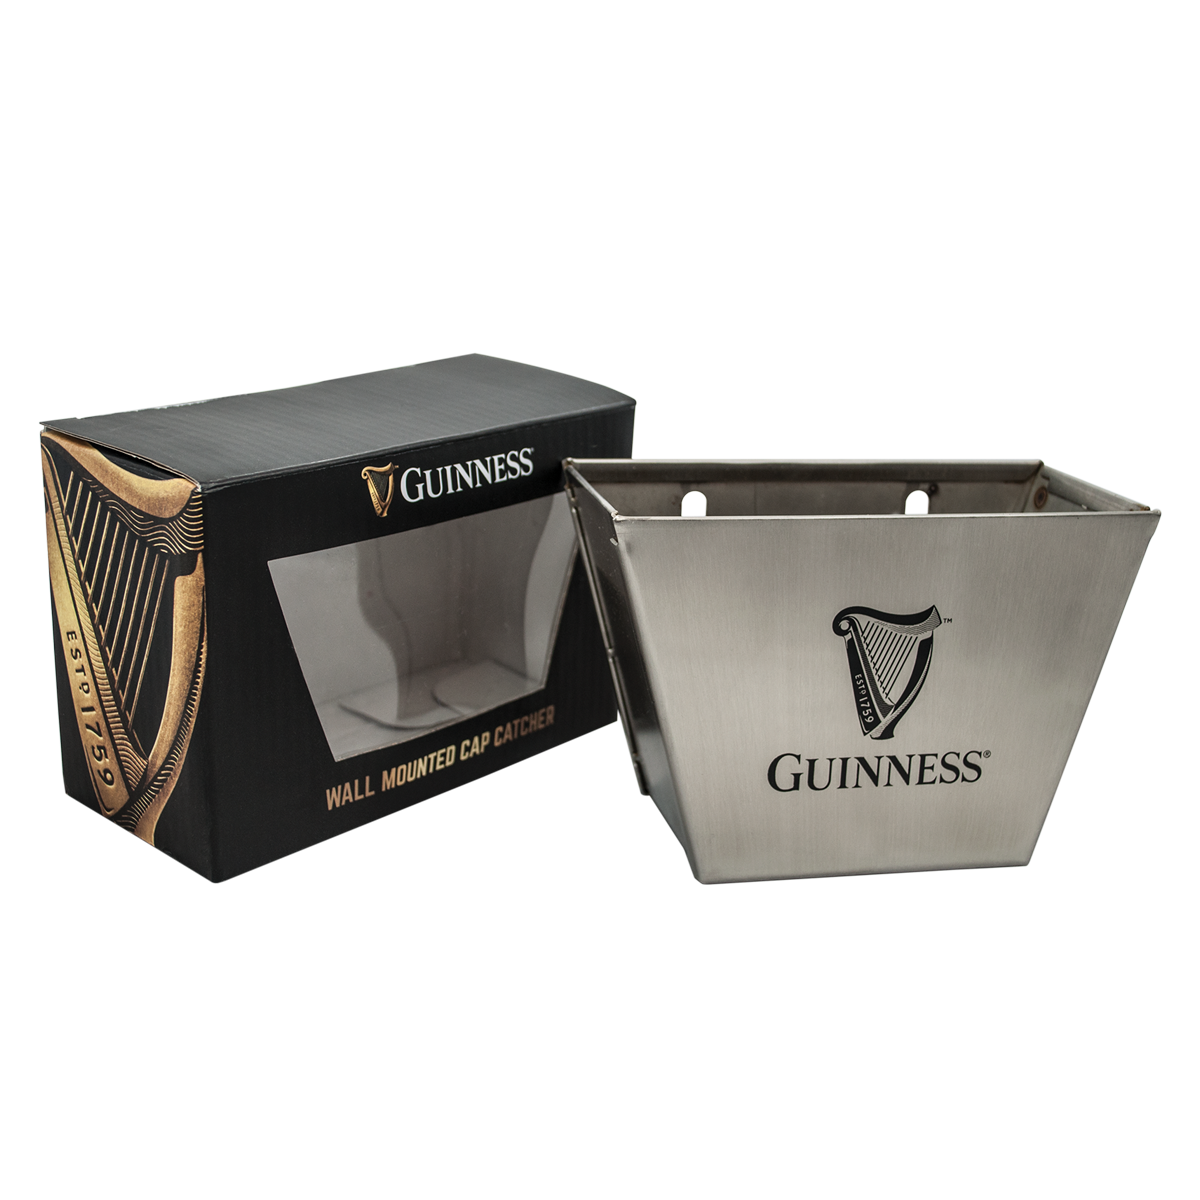 Guinness Cap Catcher - Signature Boxed beer mug with a box.